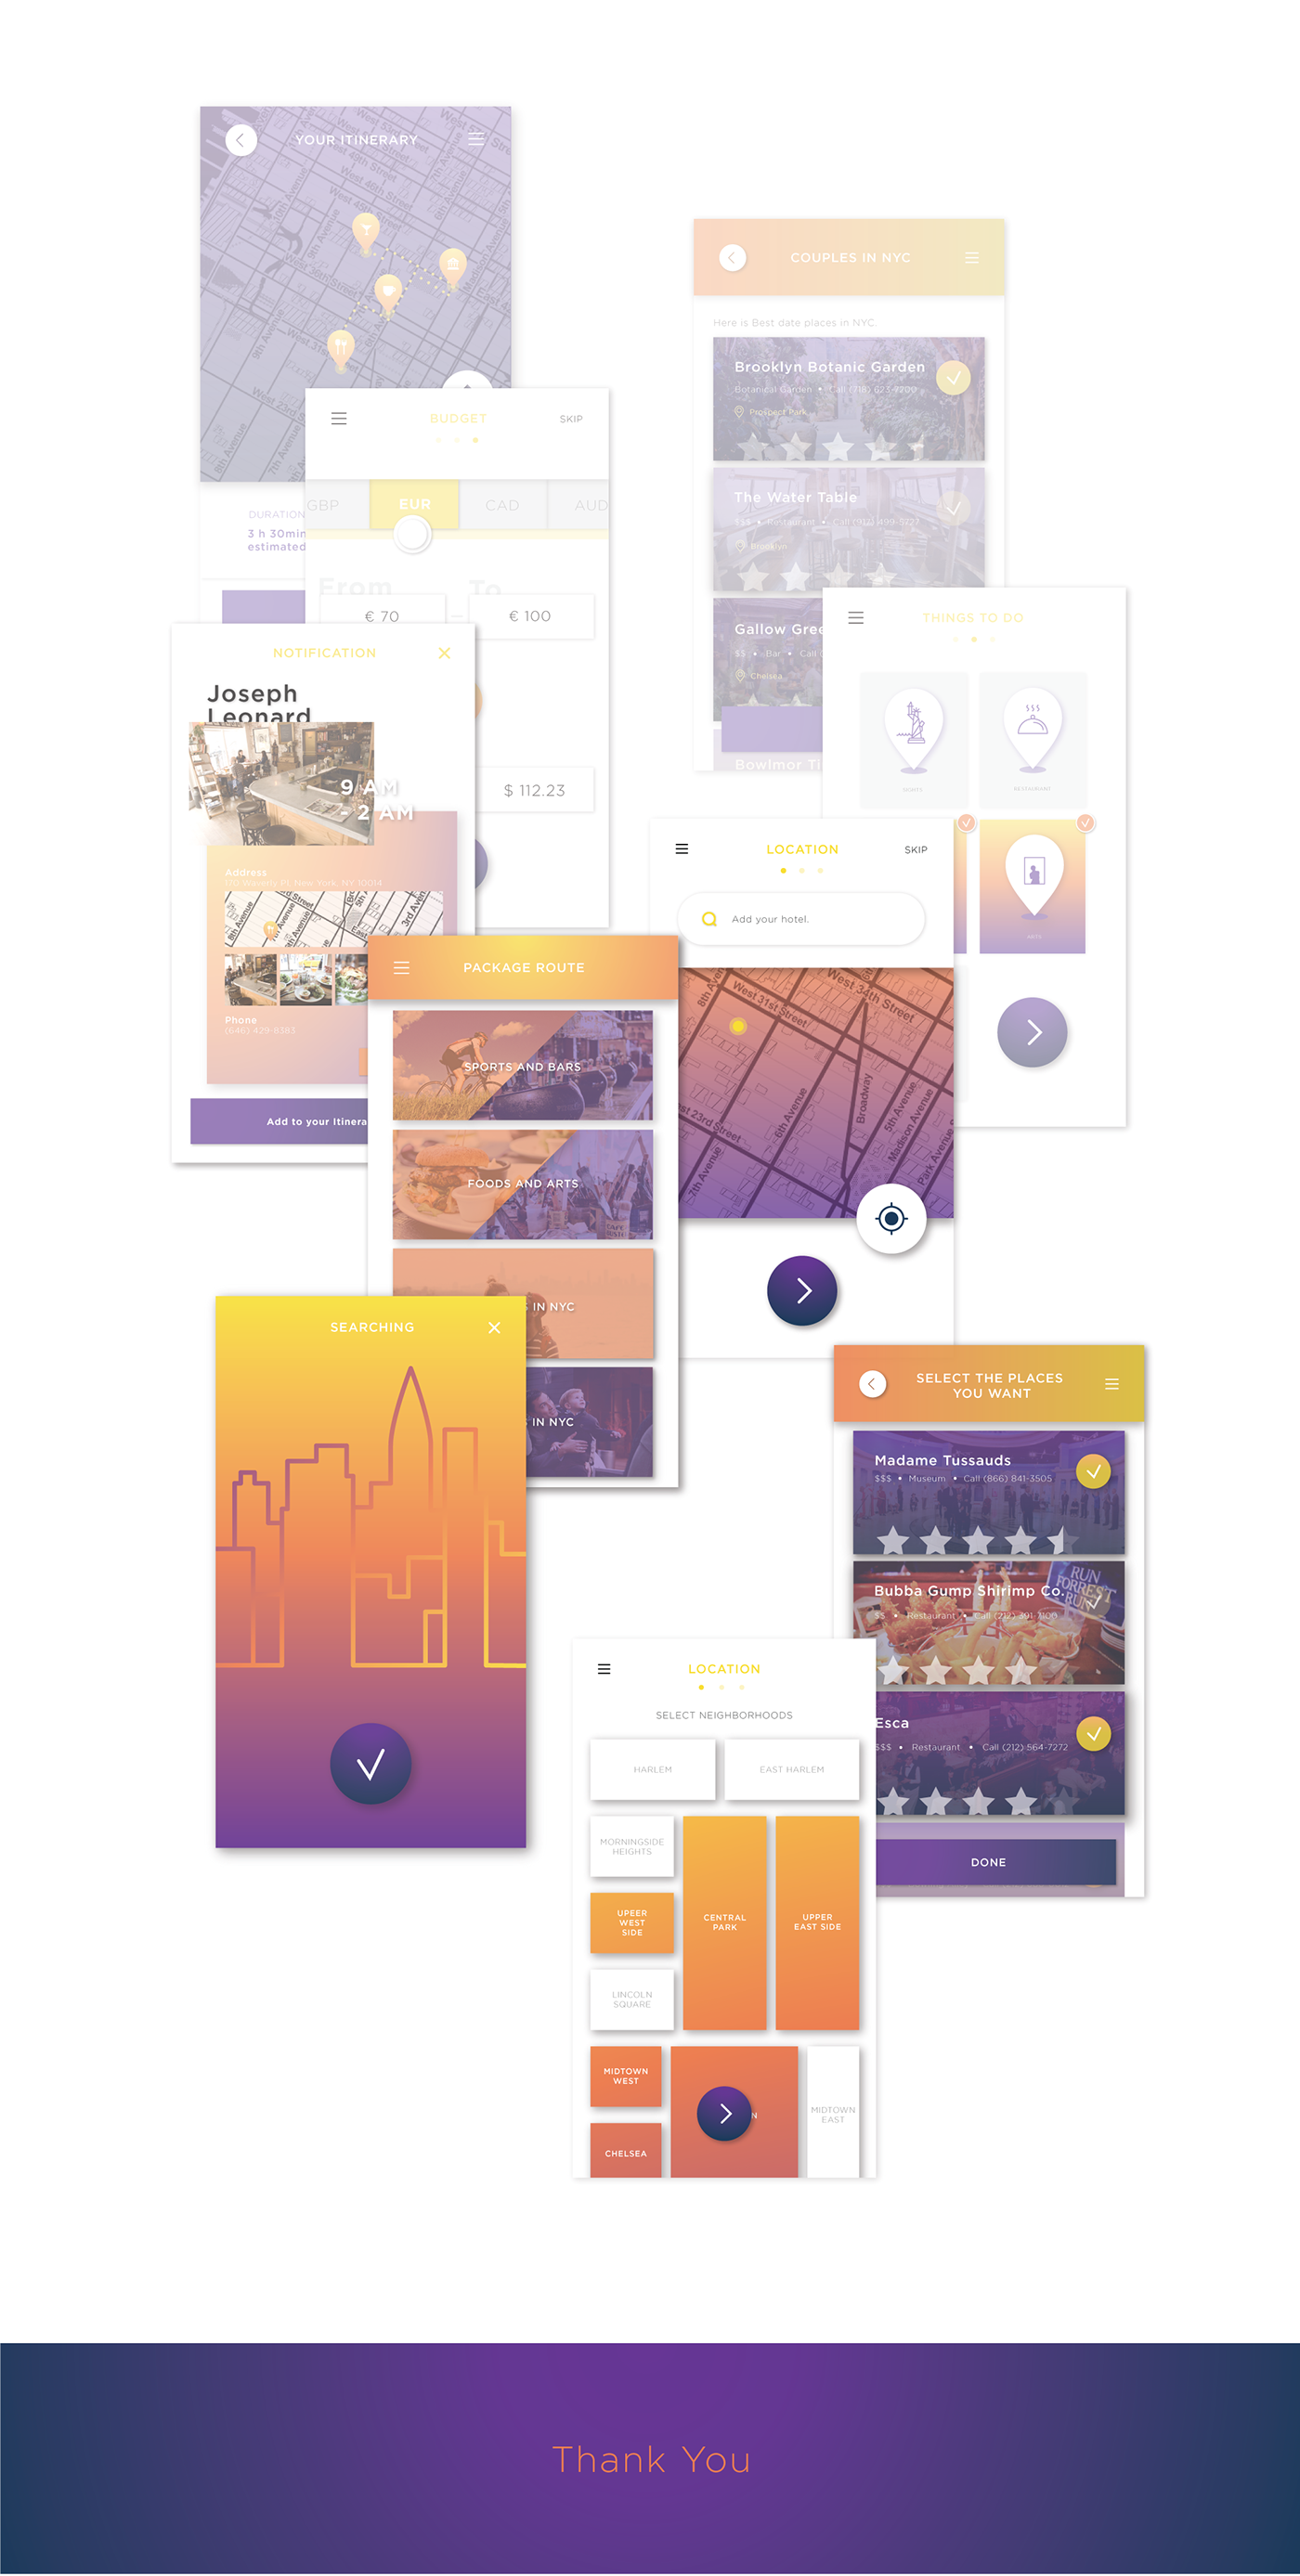 New York nyc Travel app application tour Guide user flow wireframe adobeawards